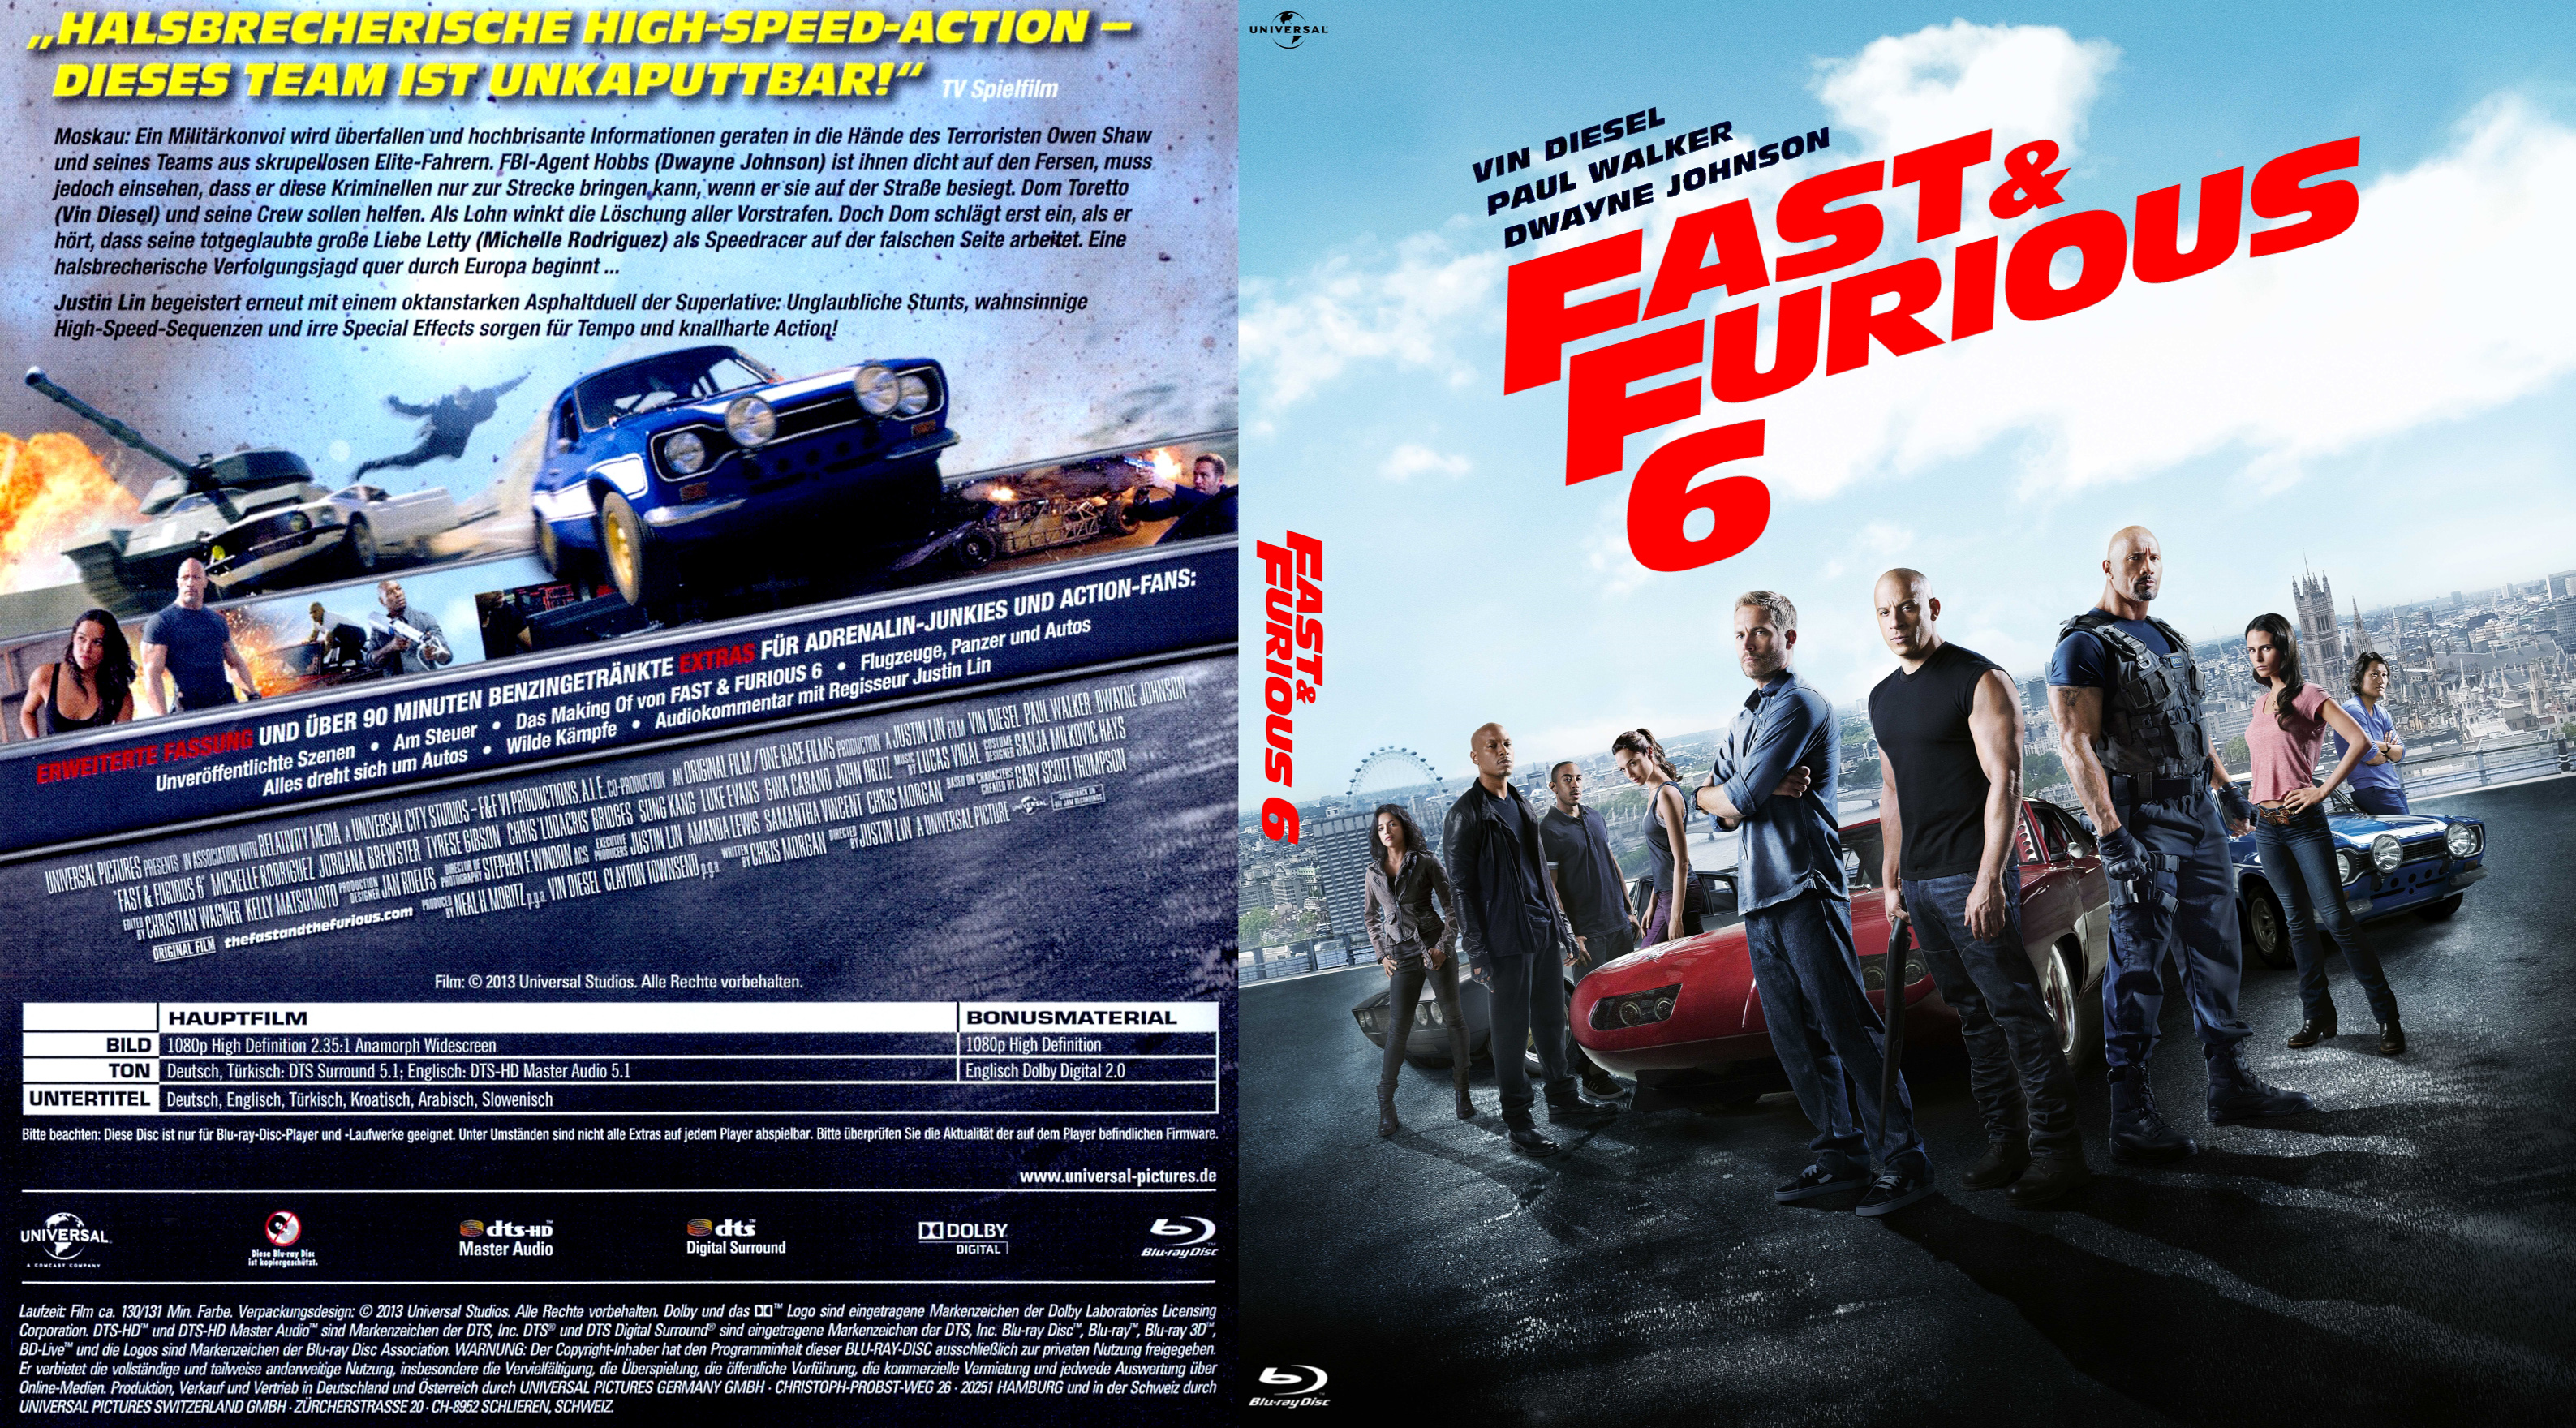 2 fast 2 furious full movie in hindi download